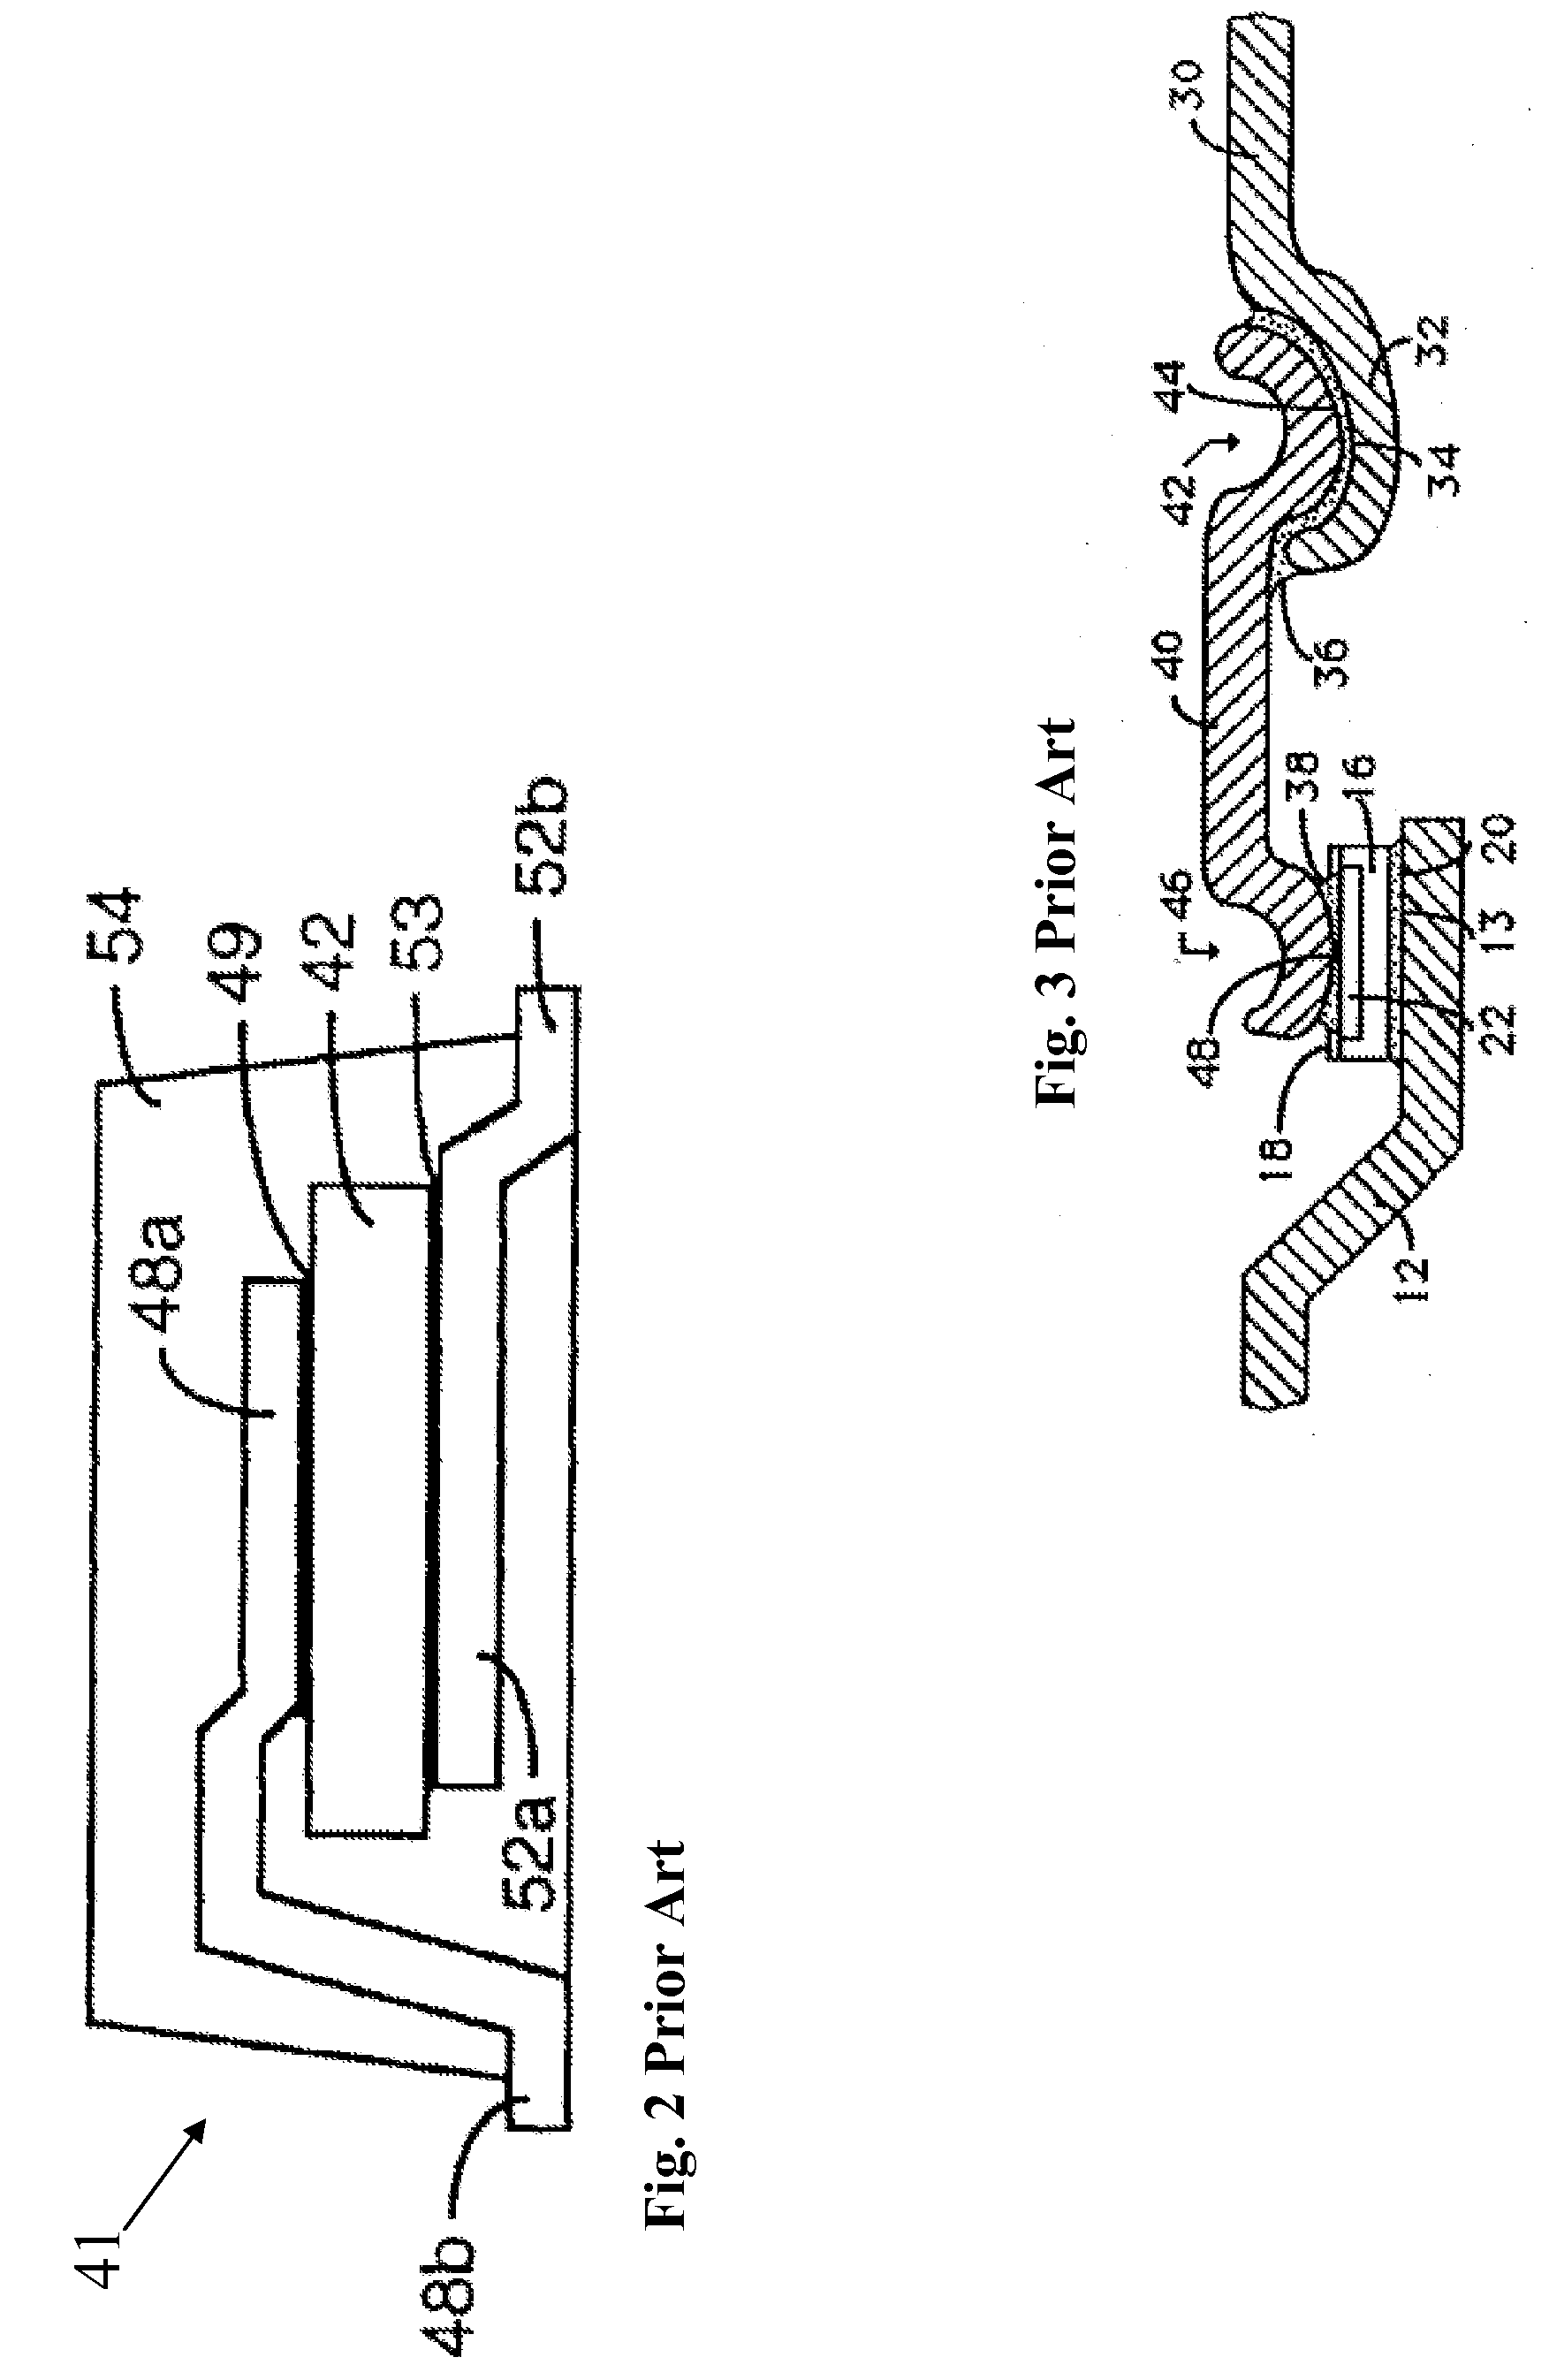 Top-side Cooled Semiconductor Package with Stacked Interconnection Plates and Method